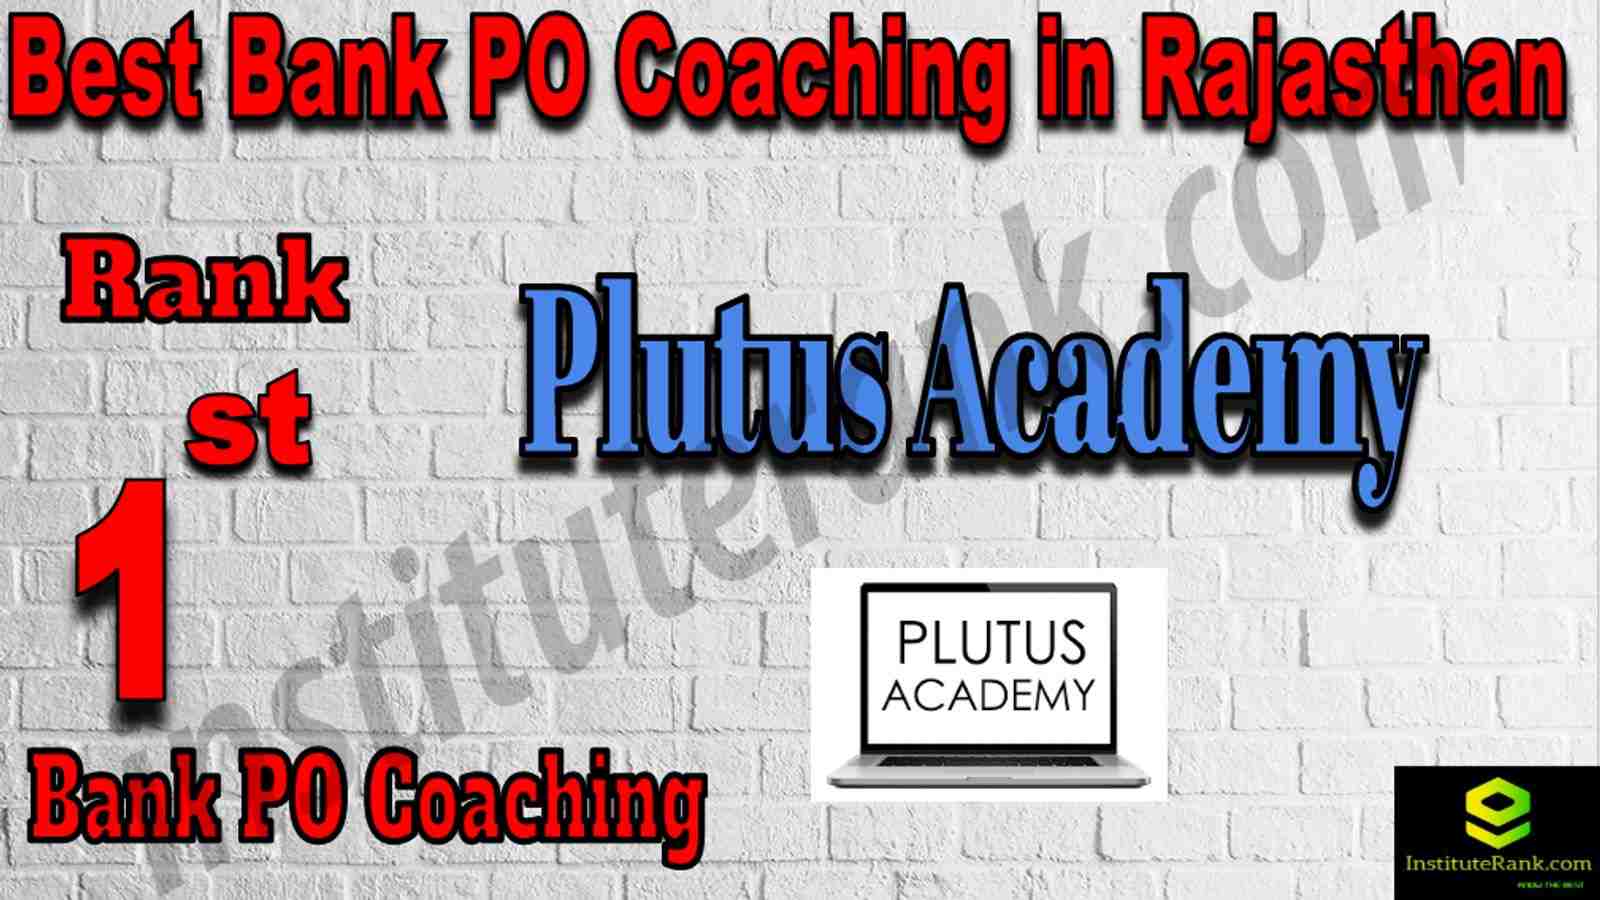 1st Best Bank PO Coaching in Rajasthan